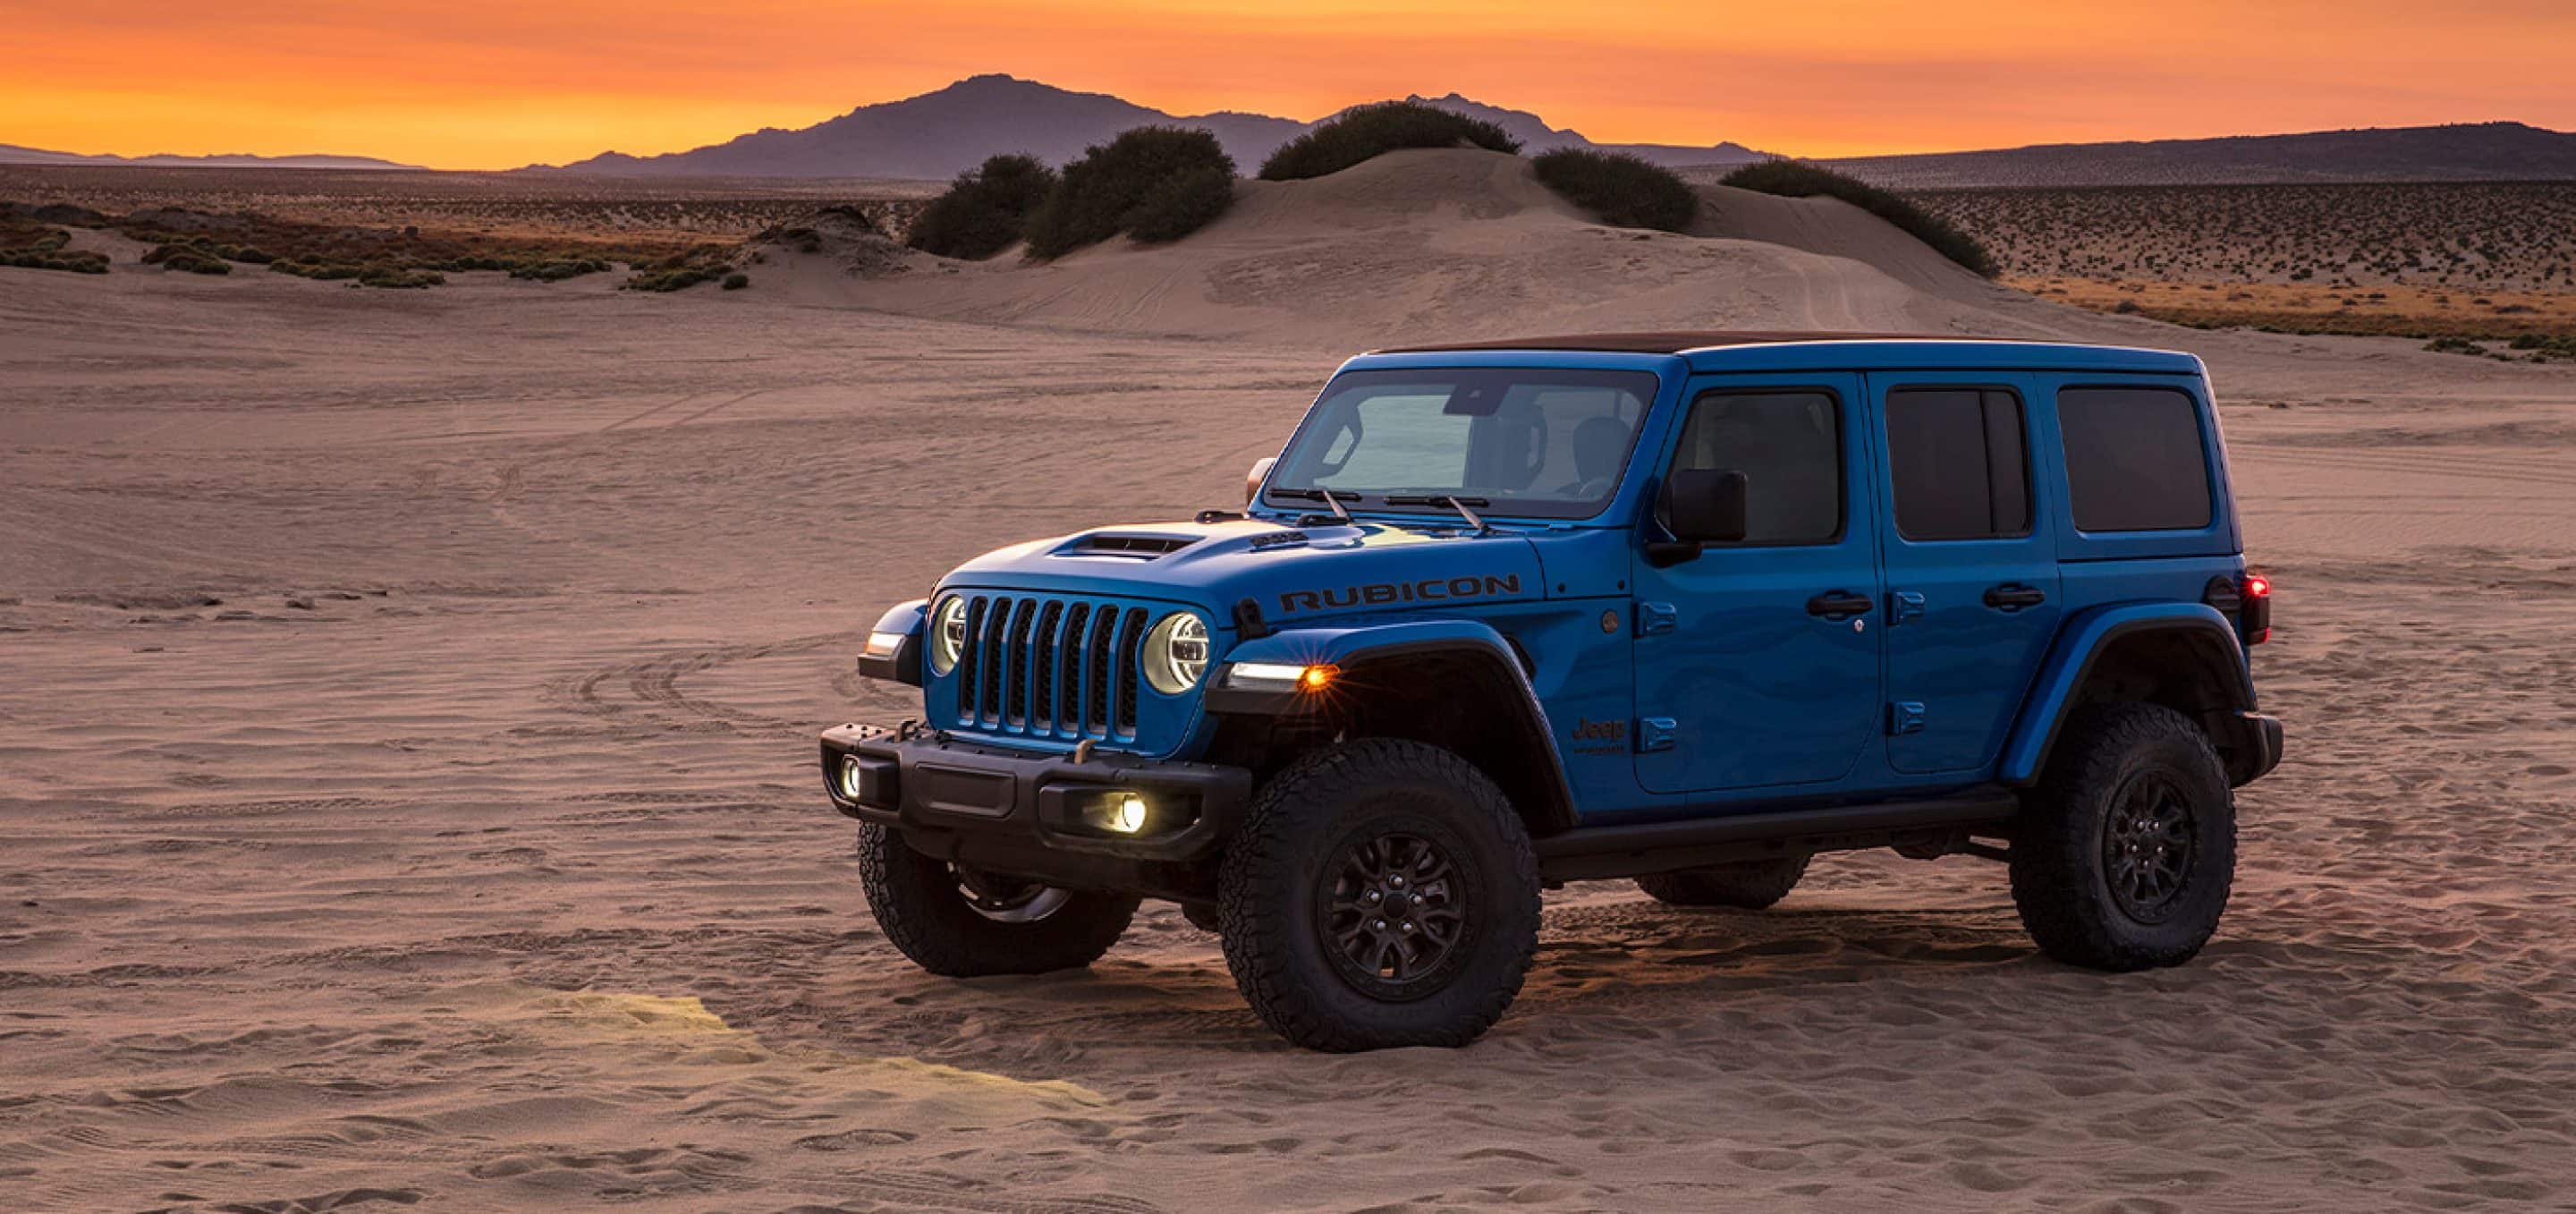 Jeep Wrangler 4xe Launch Edition Announced | Rossi Chrysler Dodge Jeep Ram